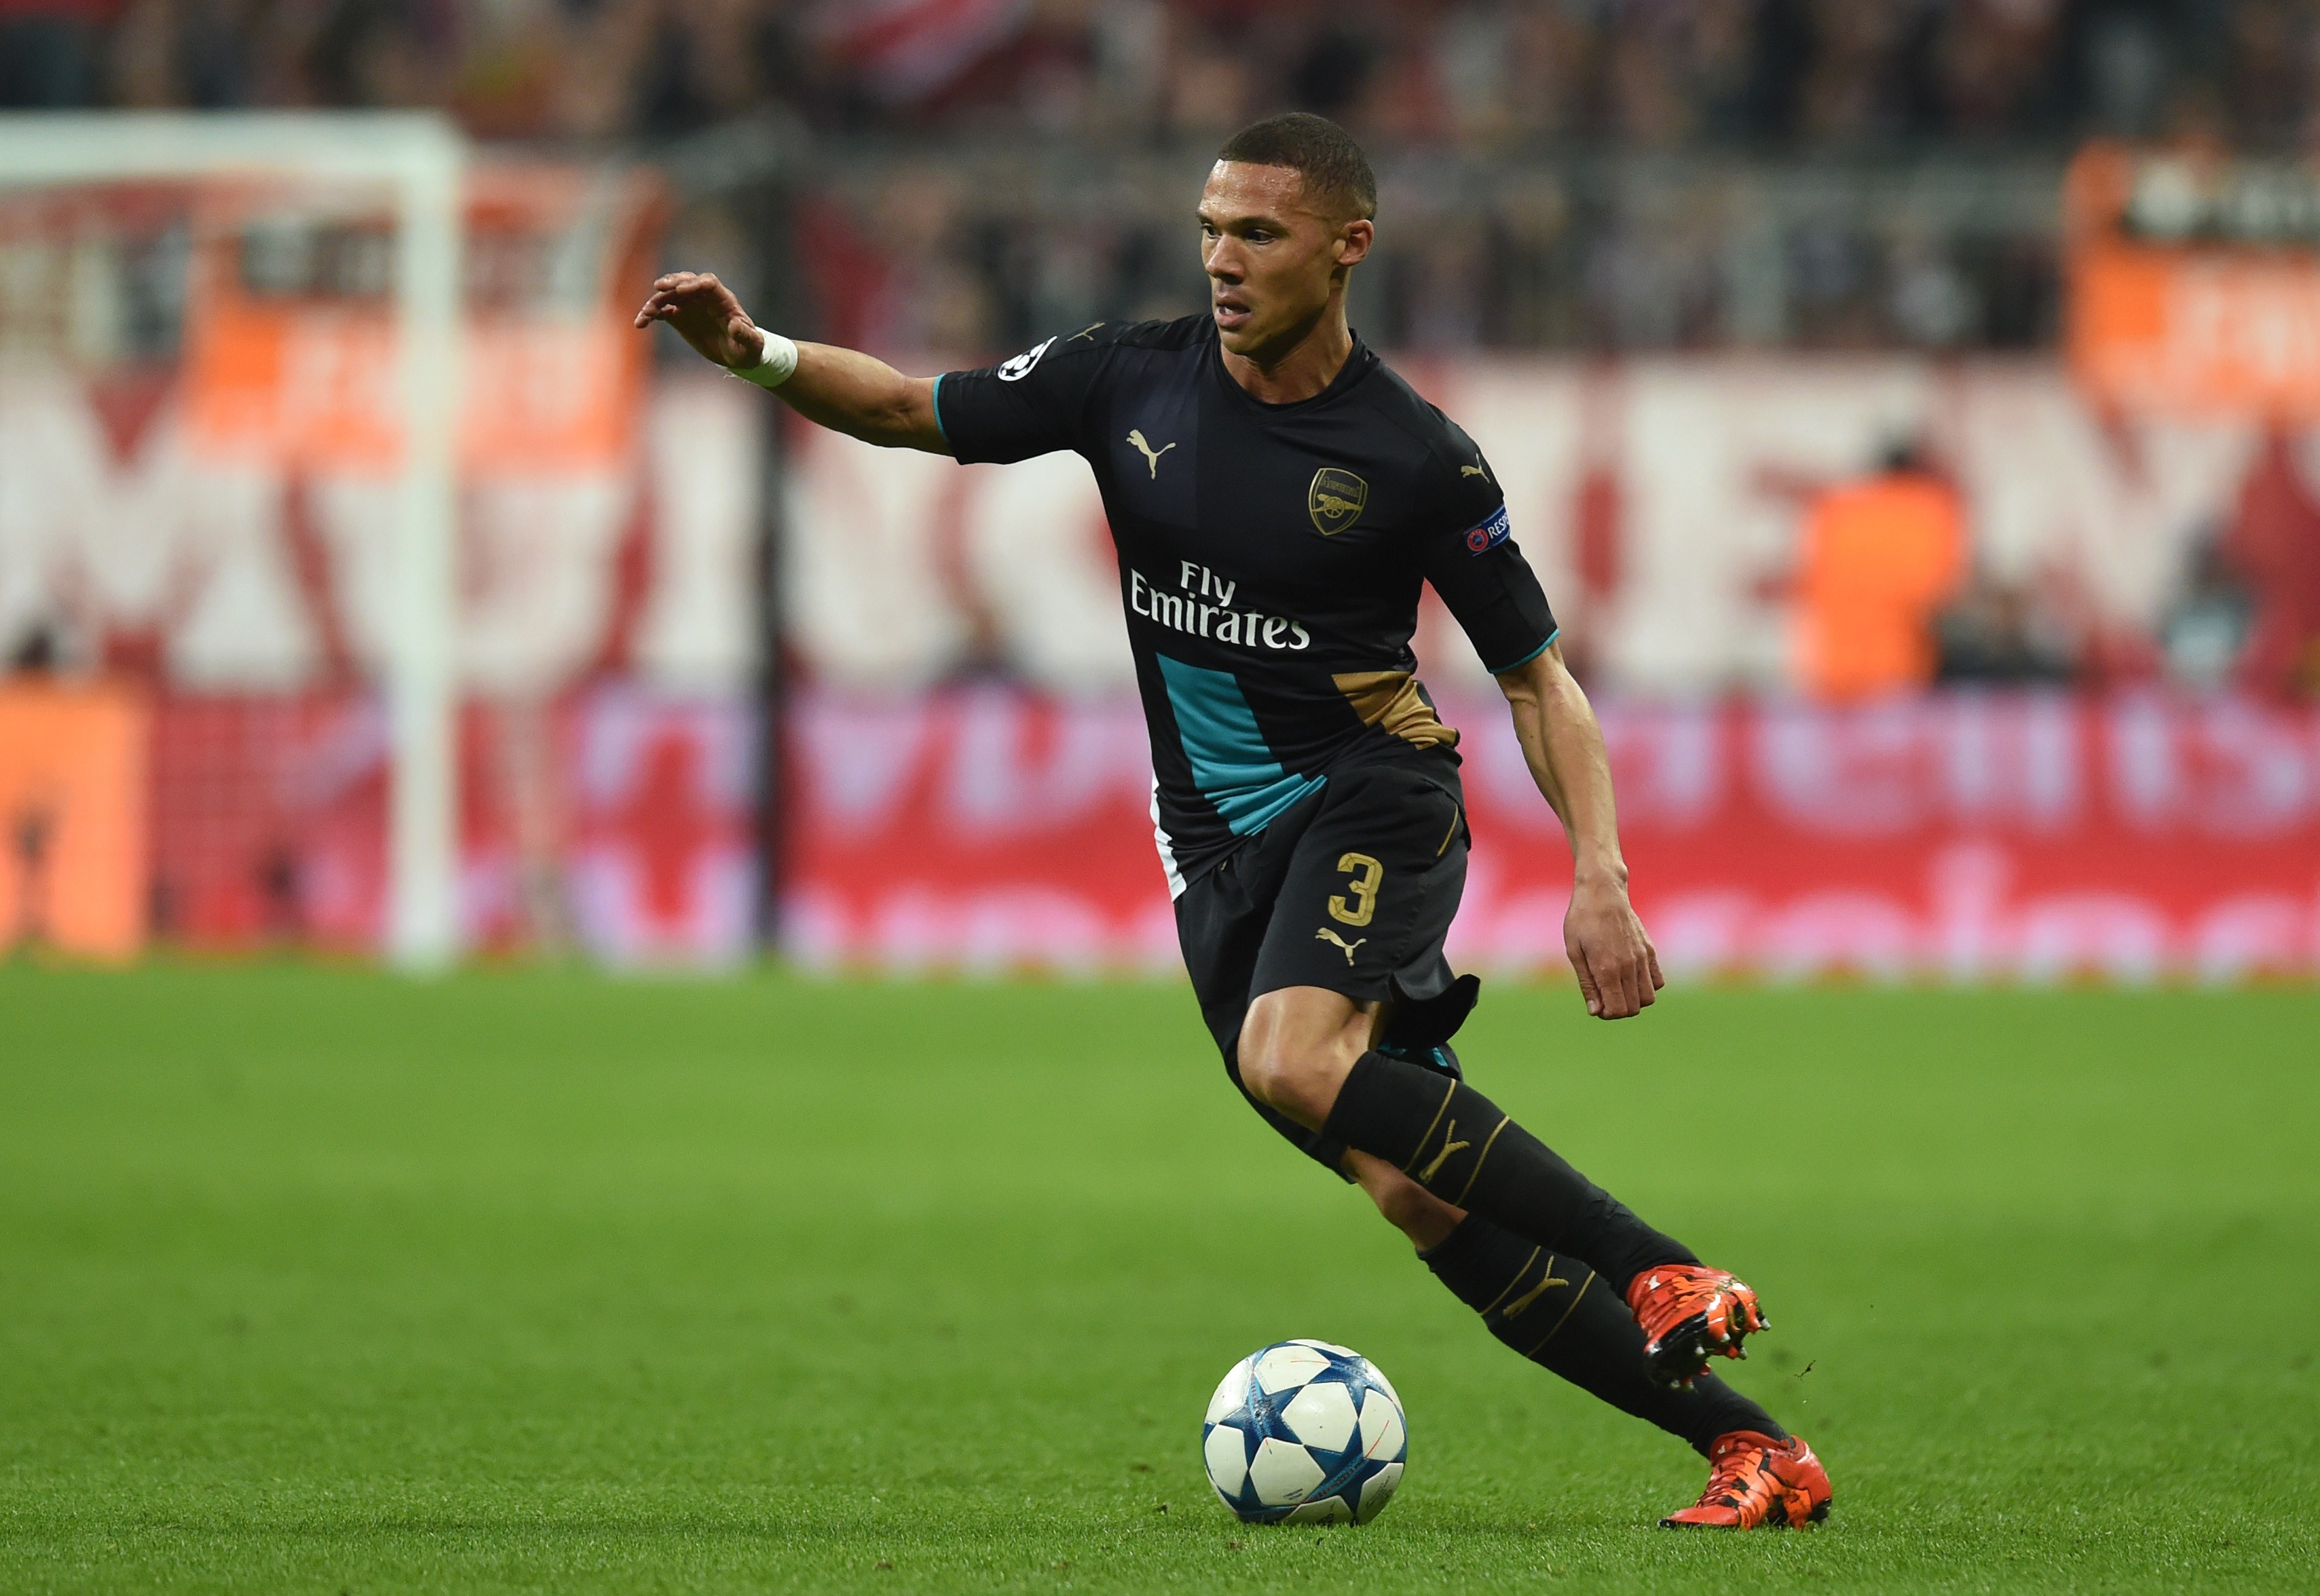 Arsenal's English defender Kieran Gibbs runs with the ball during the UEFA Champions League Group F second-leg football match between FC Bayern Munich and Arsenal FC in Munich, southern Germany, on November 4, 2015. Bayern won the match 5-1. AFP PHOTO / CHRISTOF STACHE        (Photo credit should read CHRISTOF STACHE/AFP/Getty Images)